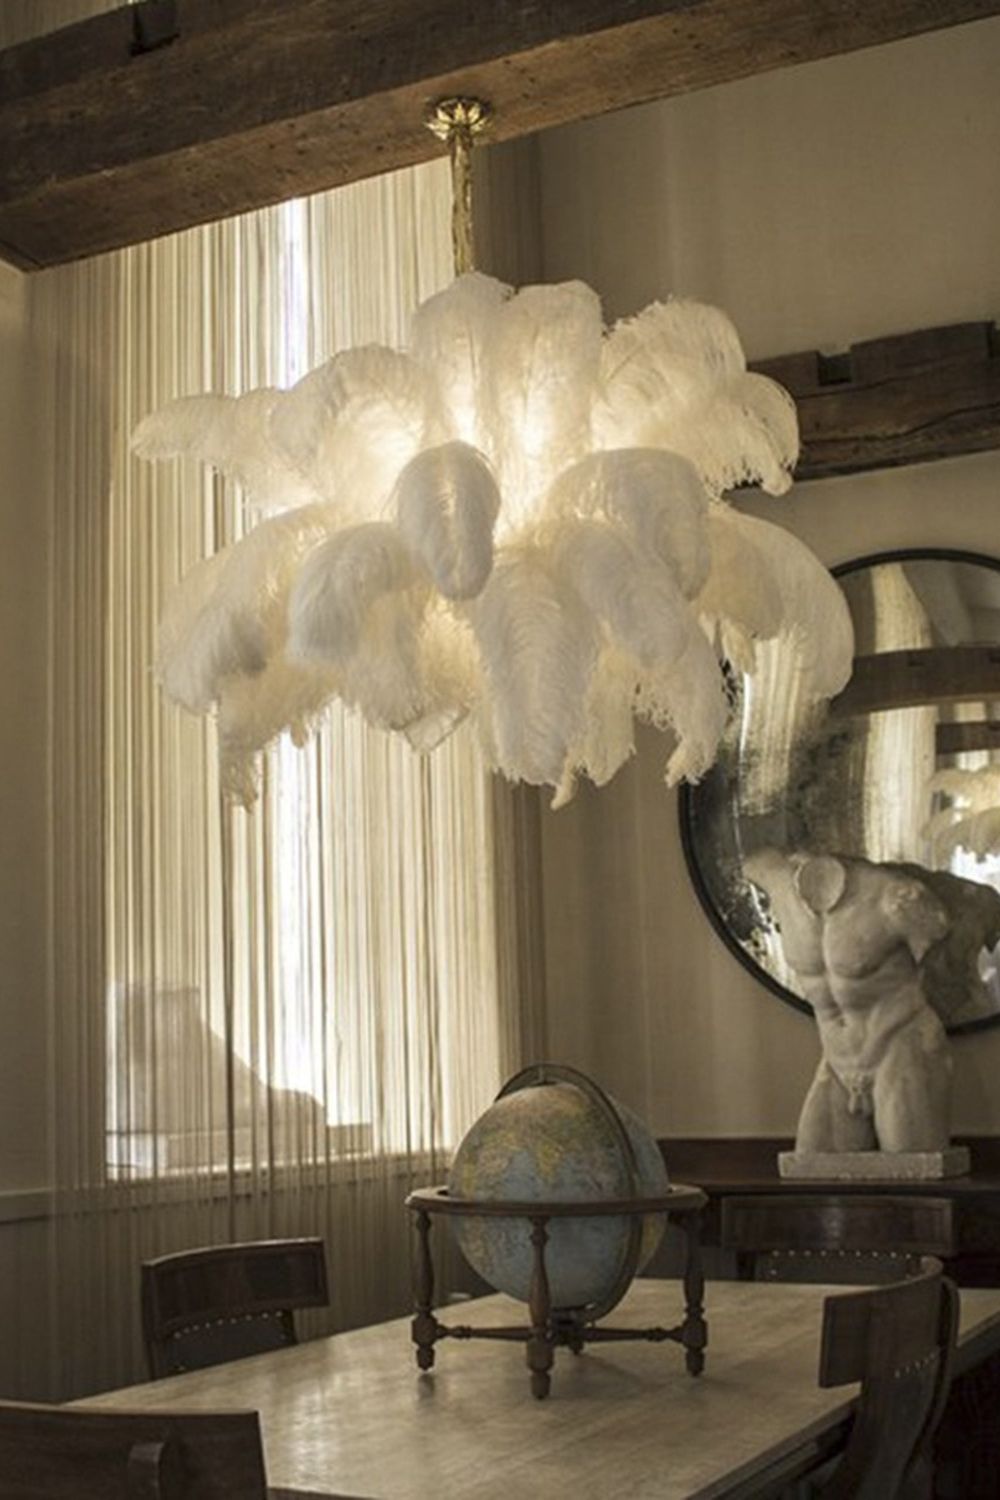 Ostrich Feather Chandeliers - SamuLighting